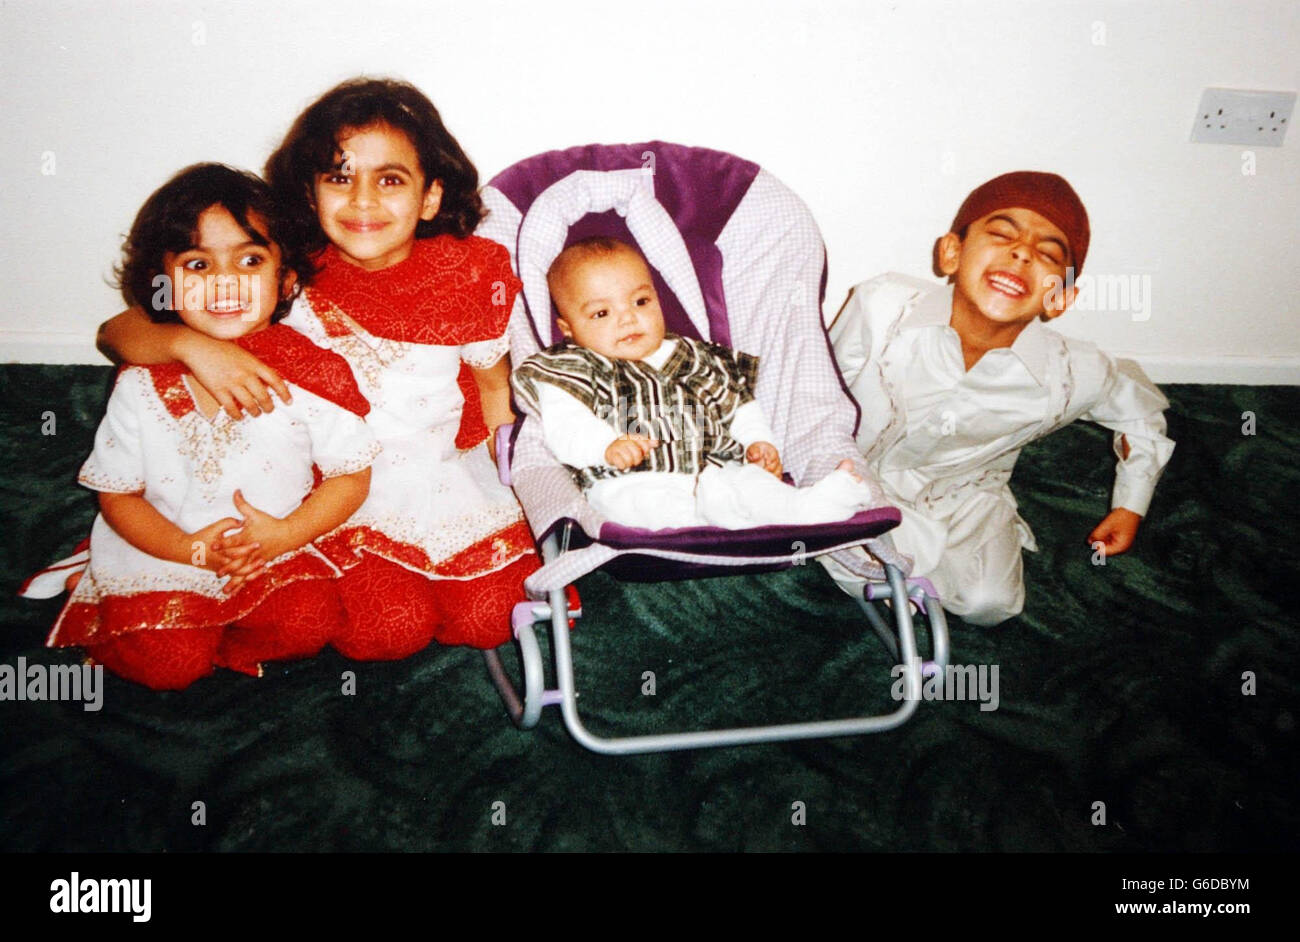 Undated collect photo of Moazzam Begg's children. British detainees at Guantanamo Bay will be among the first prisoners to face trial by secretive military tribunals, it emerged. * Moazzam, 35, and Feroz Abbasi, 23, are on US President George Bush's initial list of six who could face the death penalty, although neither charges nor exact details of the tribunals have been released by the US. Both men are accused of being al Qaida terrorists. Today Moazzam's father Azmat Begg said he was concerned his son, a father of four, would not receive a fair trial. Stock Photo